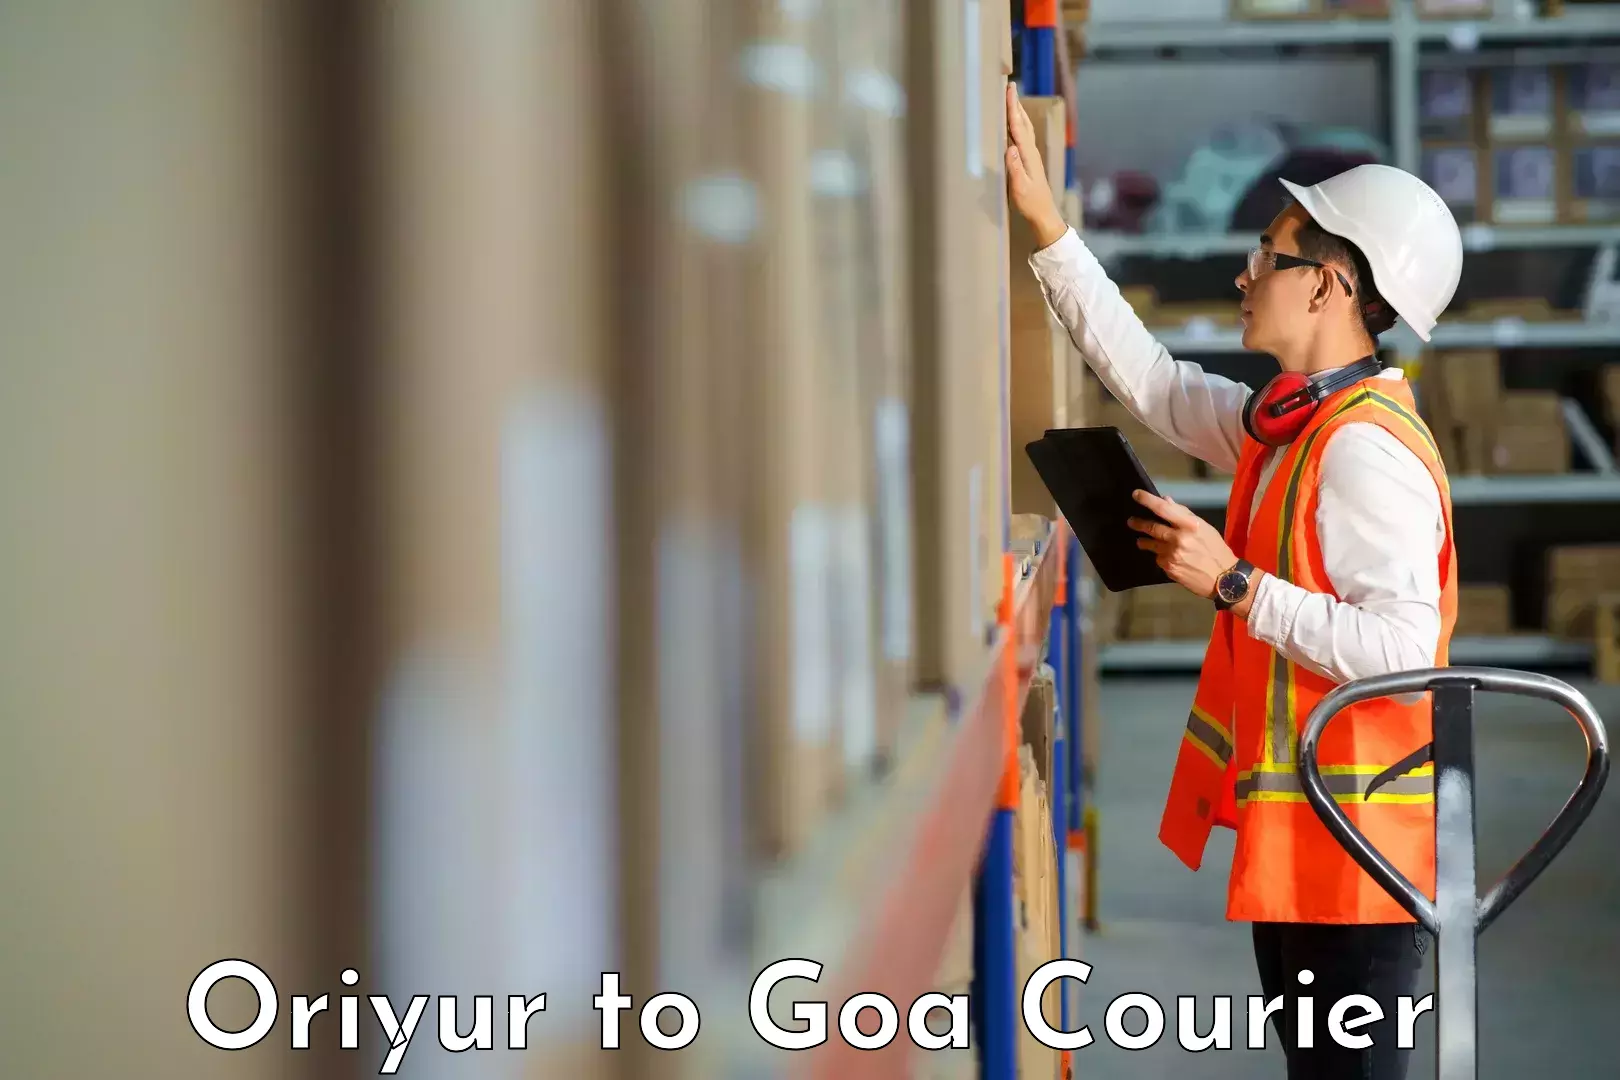 Sustainable delivery practices Oriyur to Goa